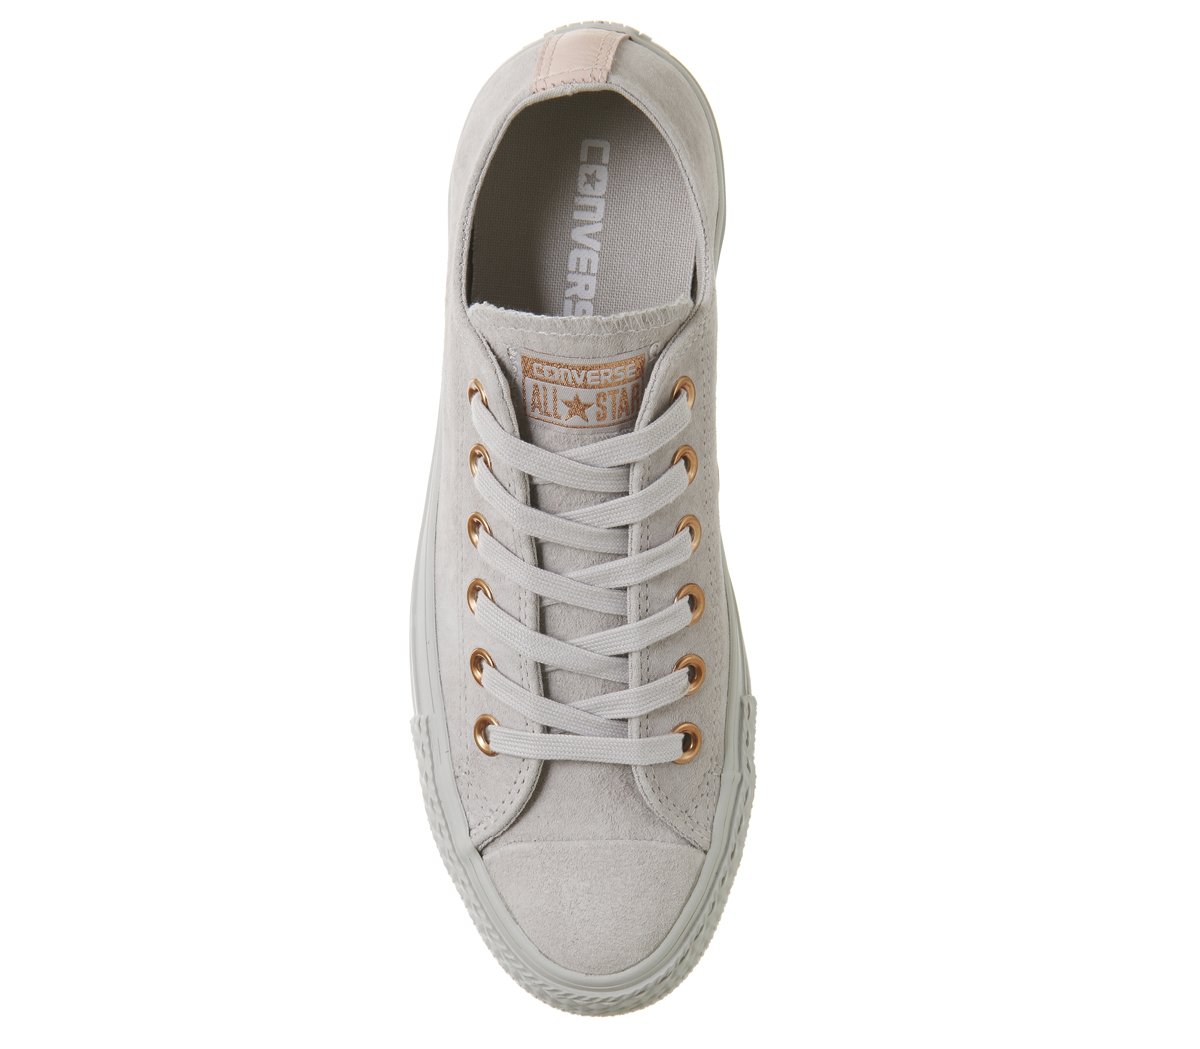 converse all star low top leather trainers